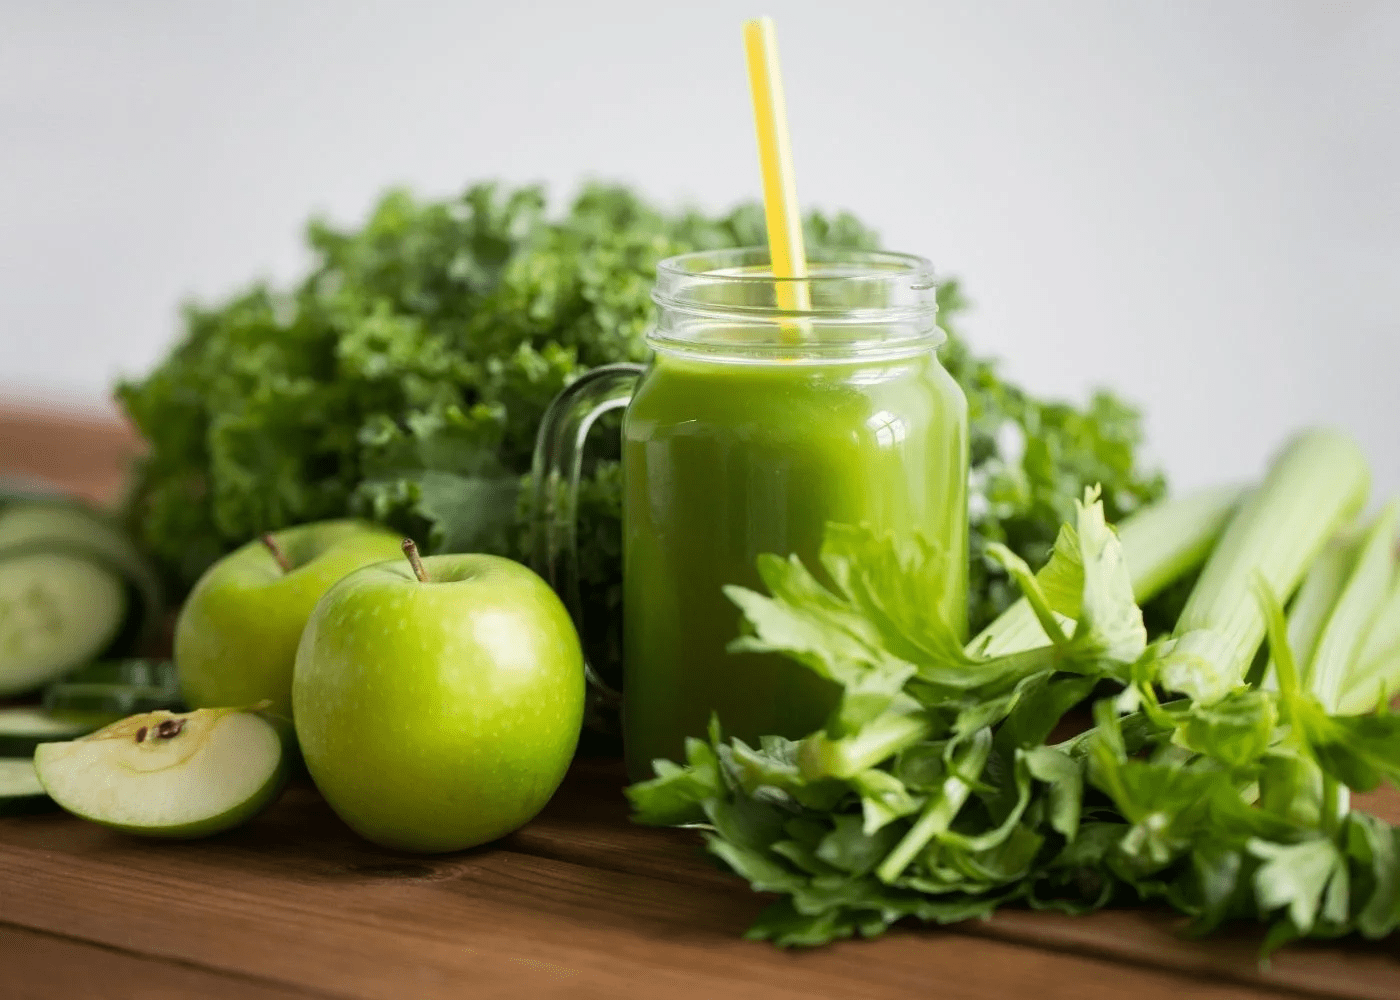 The Juice Diet Challenge for Fitness: 7 Tips & Tricks